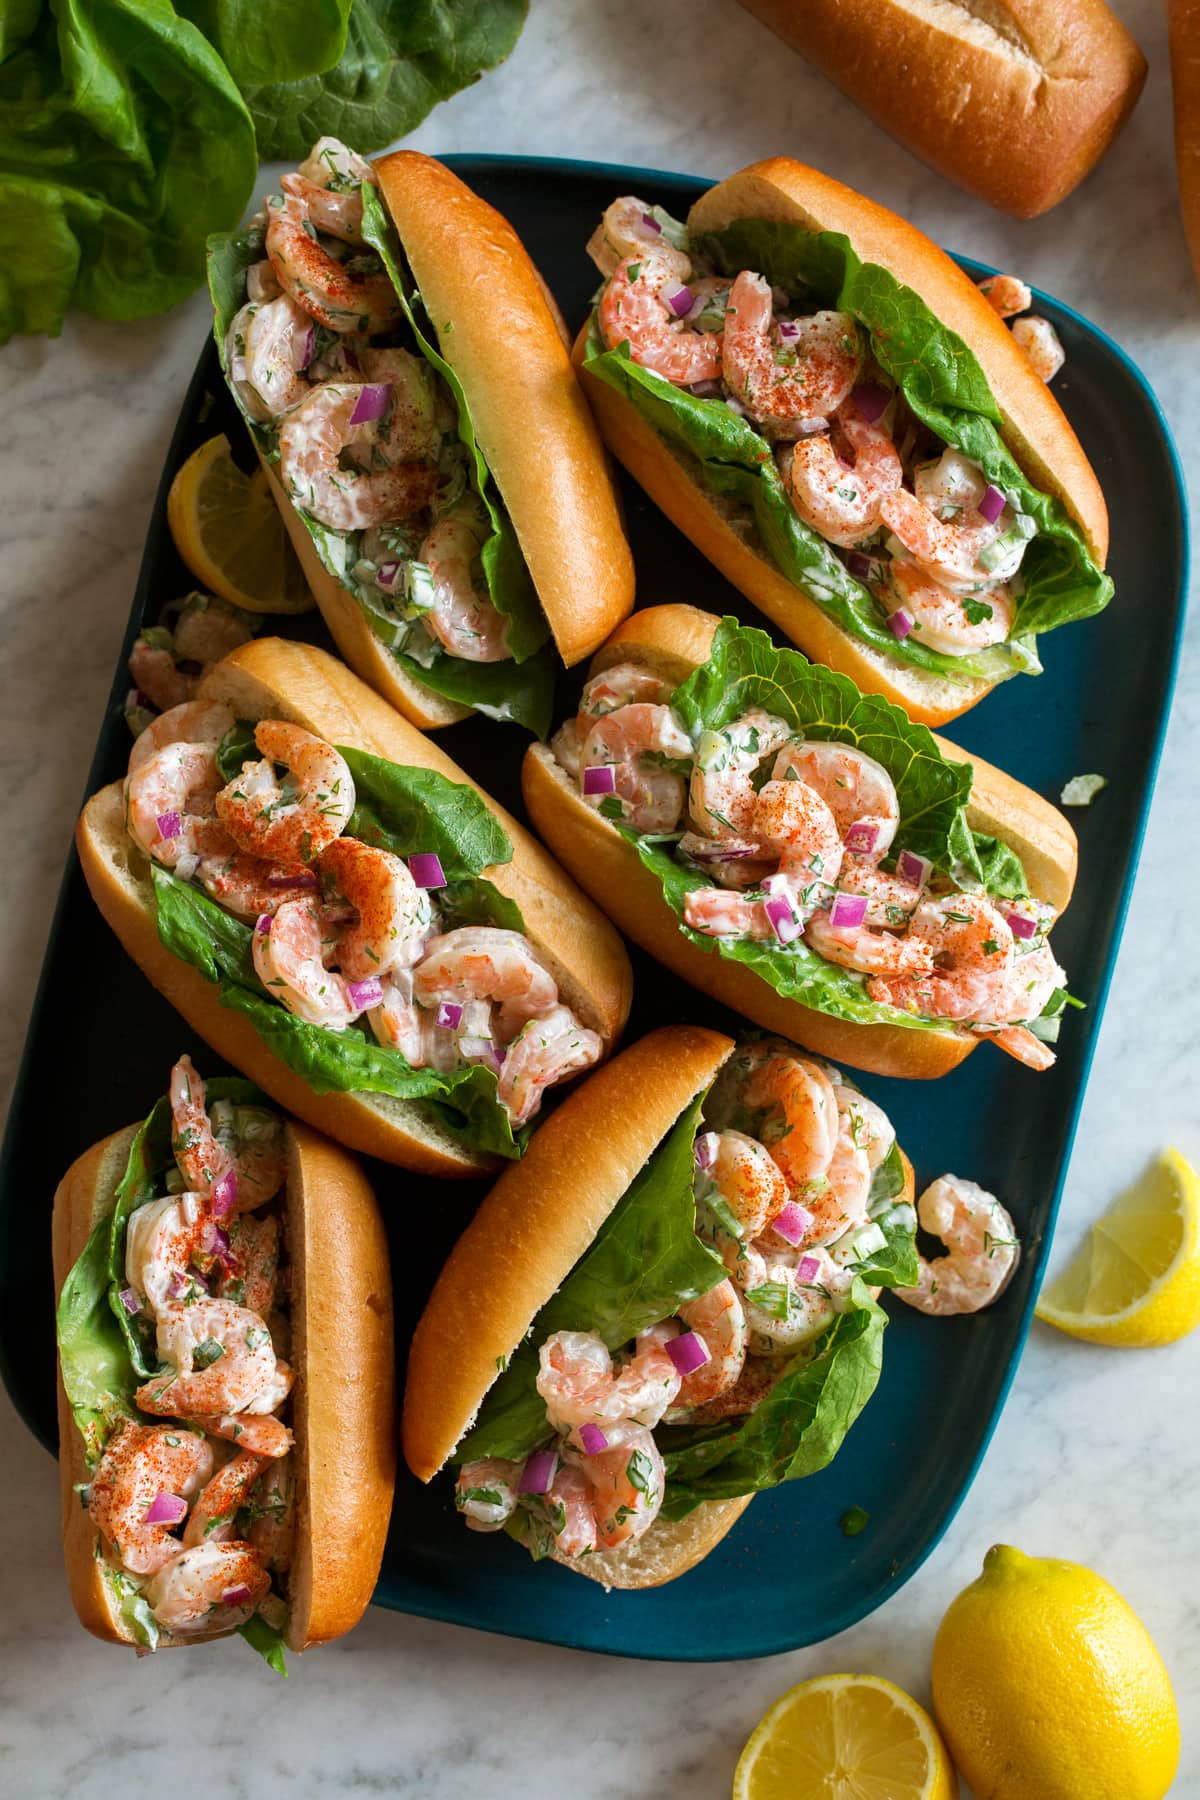 Shrimp Salad shown served in hoagie buns with lettuce leaves on a blue rectangular platter from above.